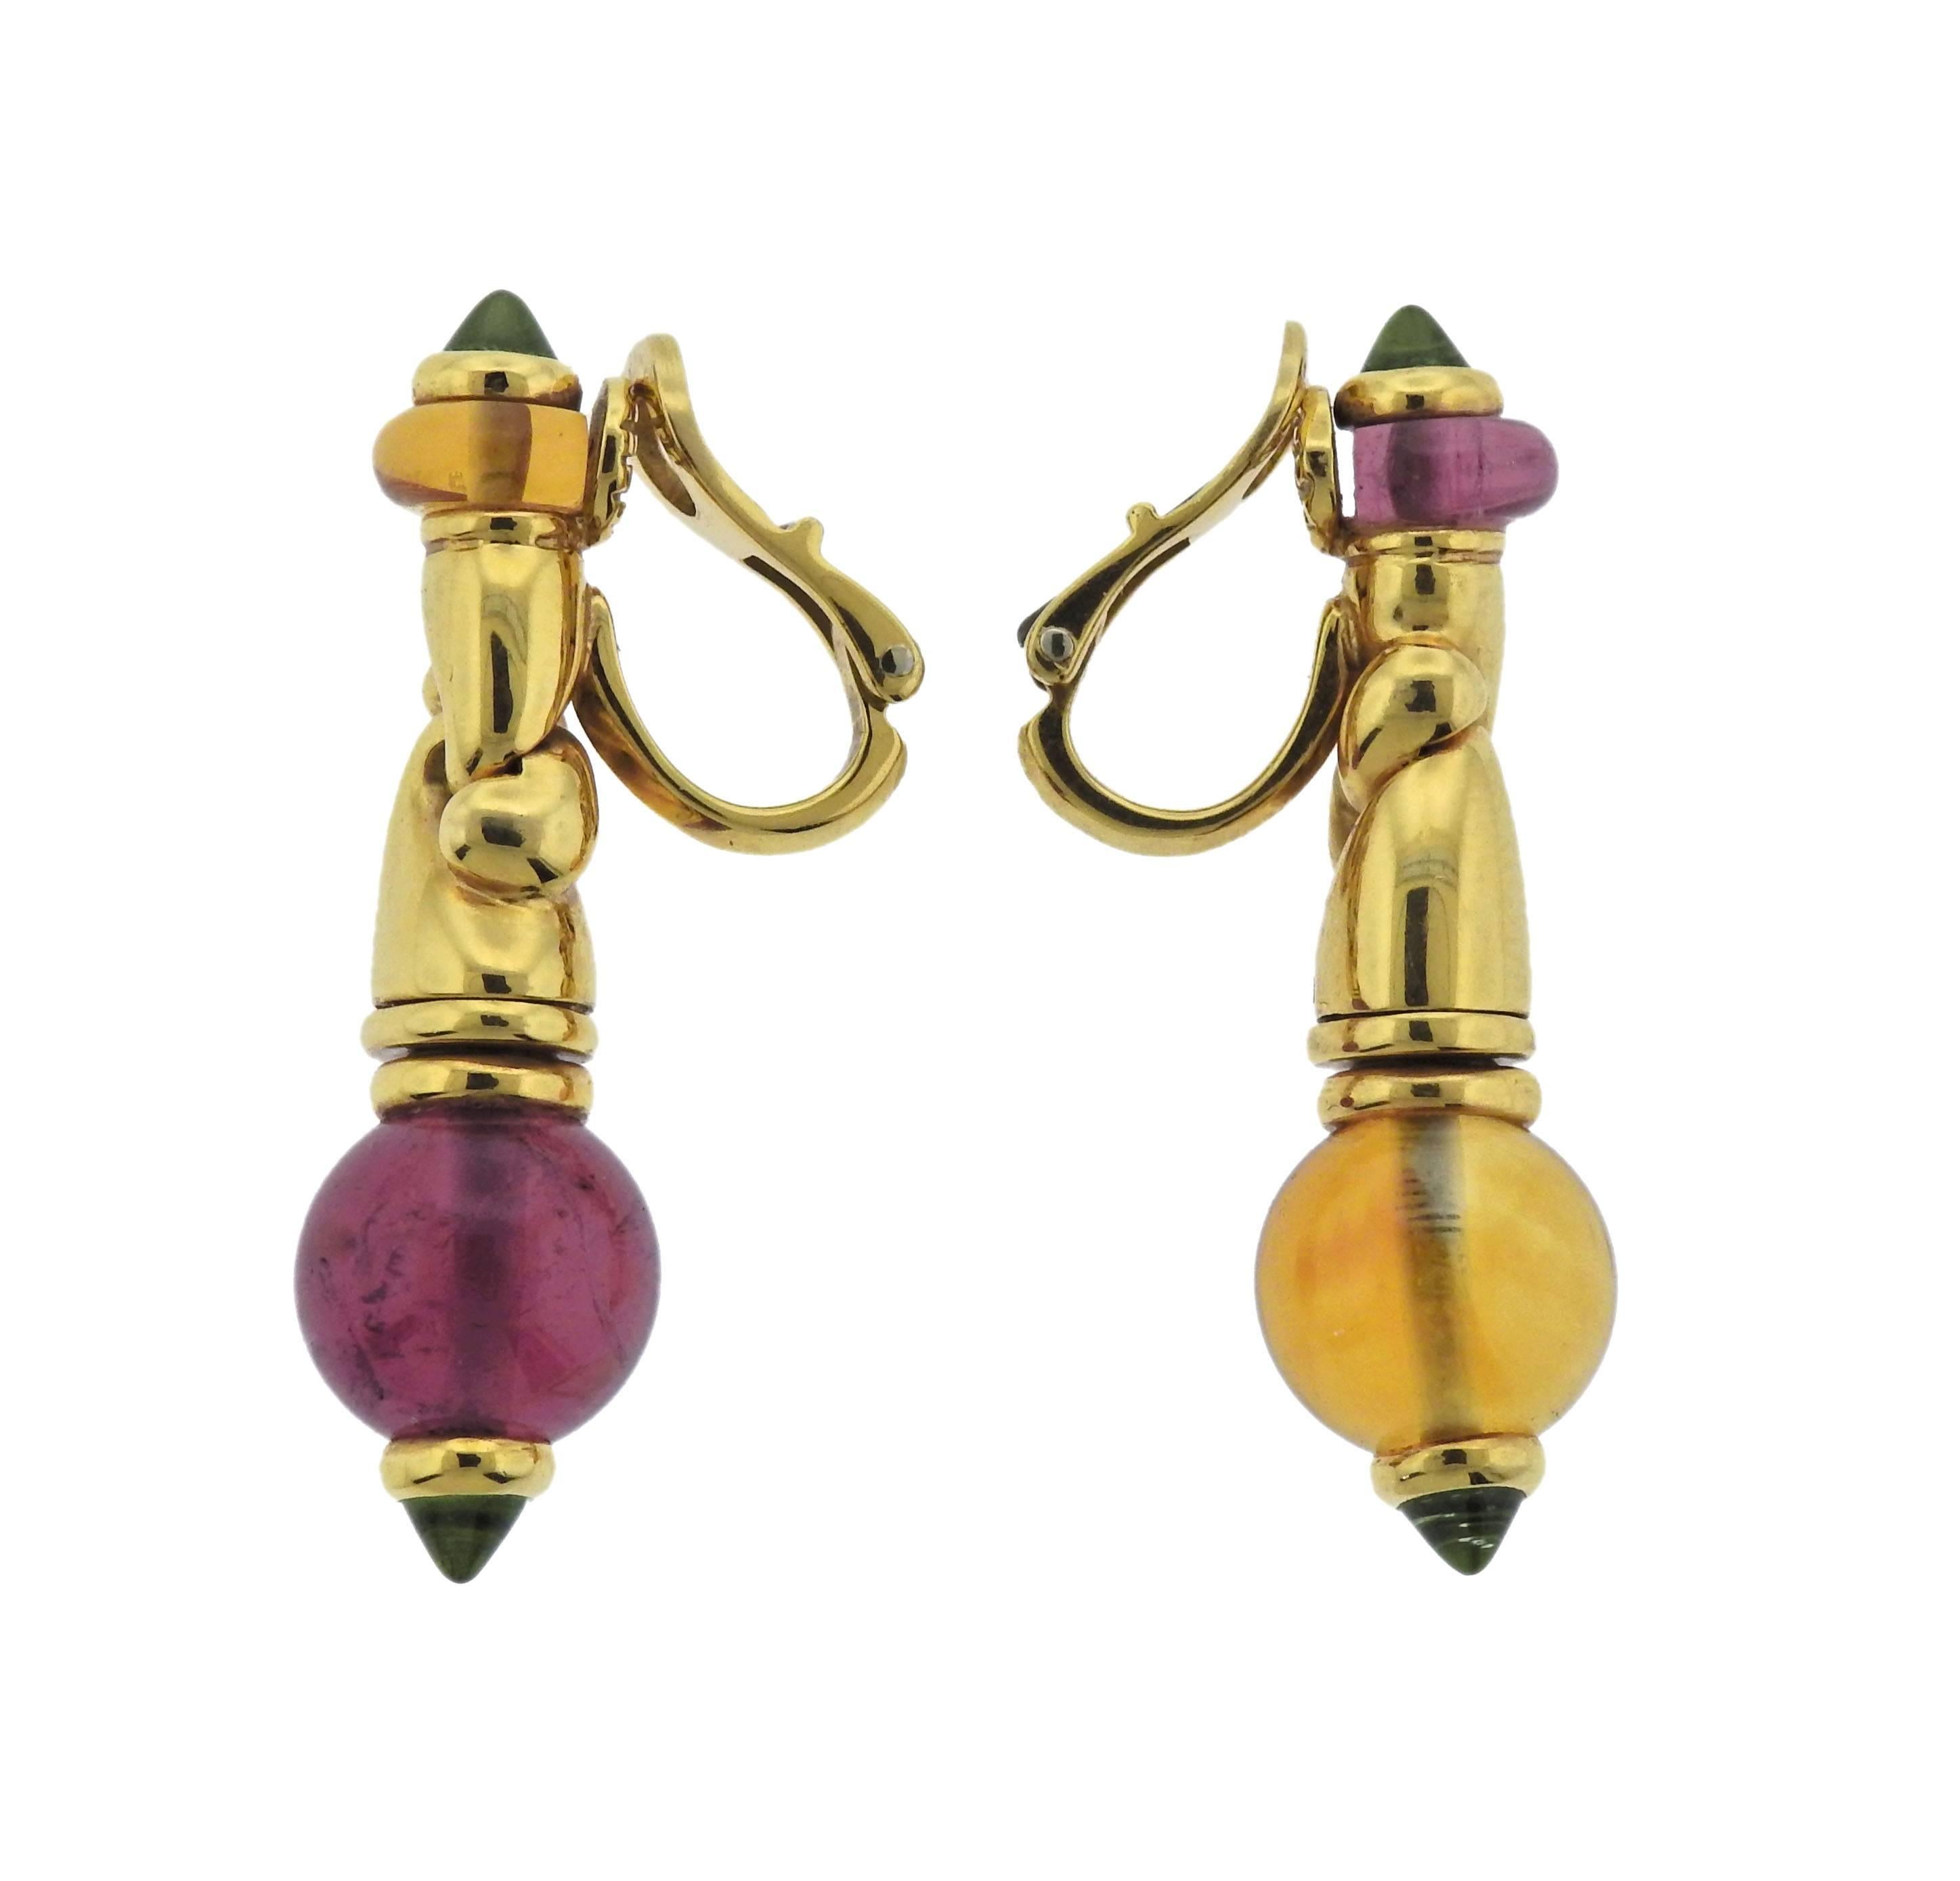  Pair of 18k gold earrings, crafted by Bulgari, set with citrine and tourmaline gemstones. Earrings 38mm long x 11mm, weigh 21.5 grams. Marked: 1989, 2337AL, 750, Bvlgari.